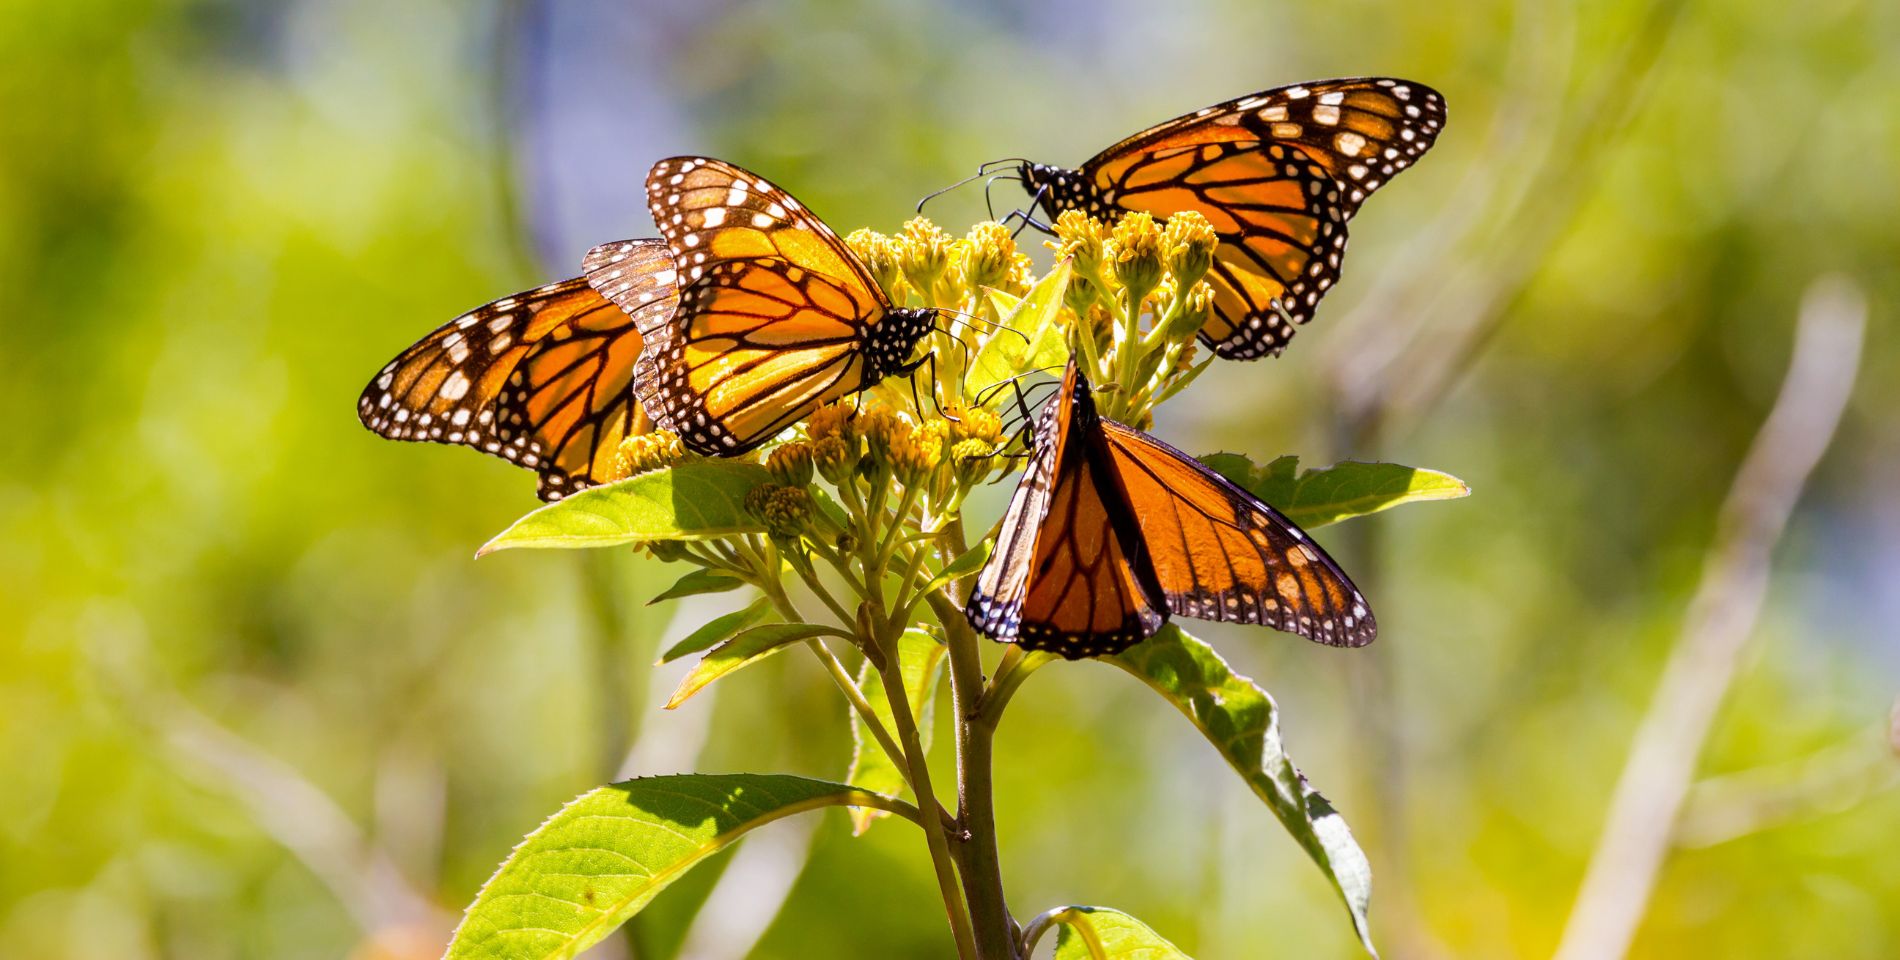 A group of four Monarch butterflies on a flower